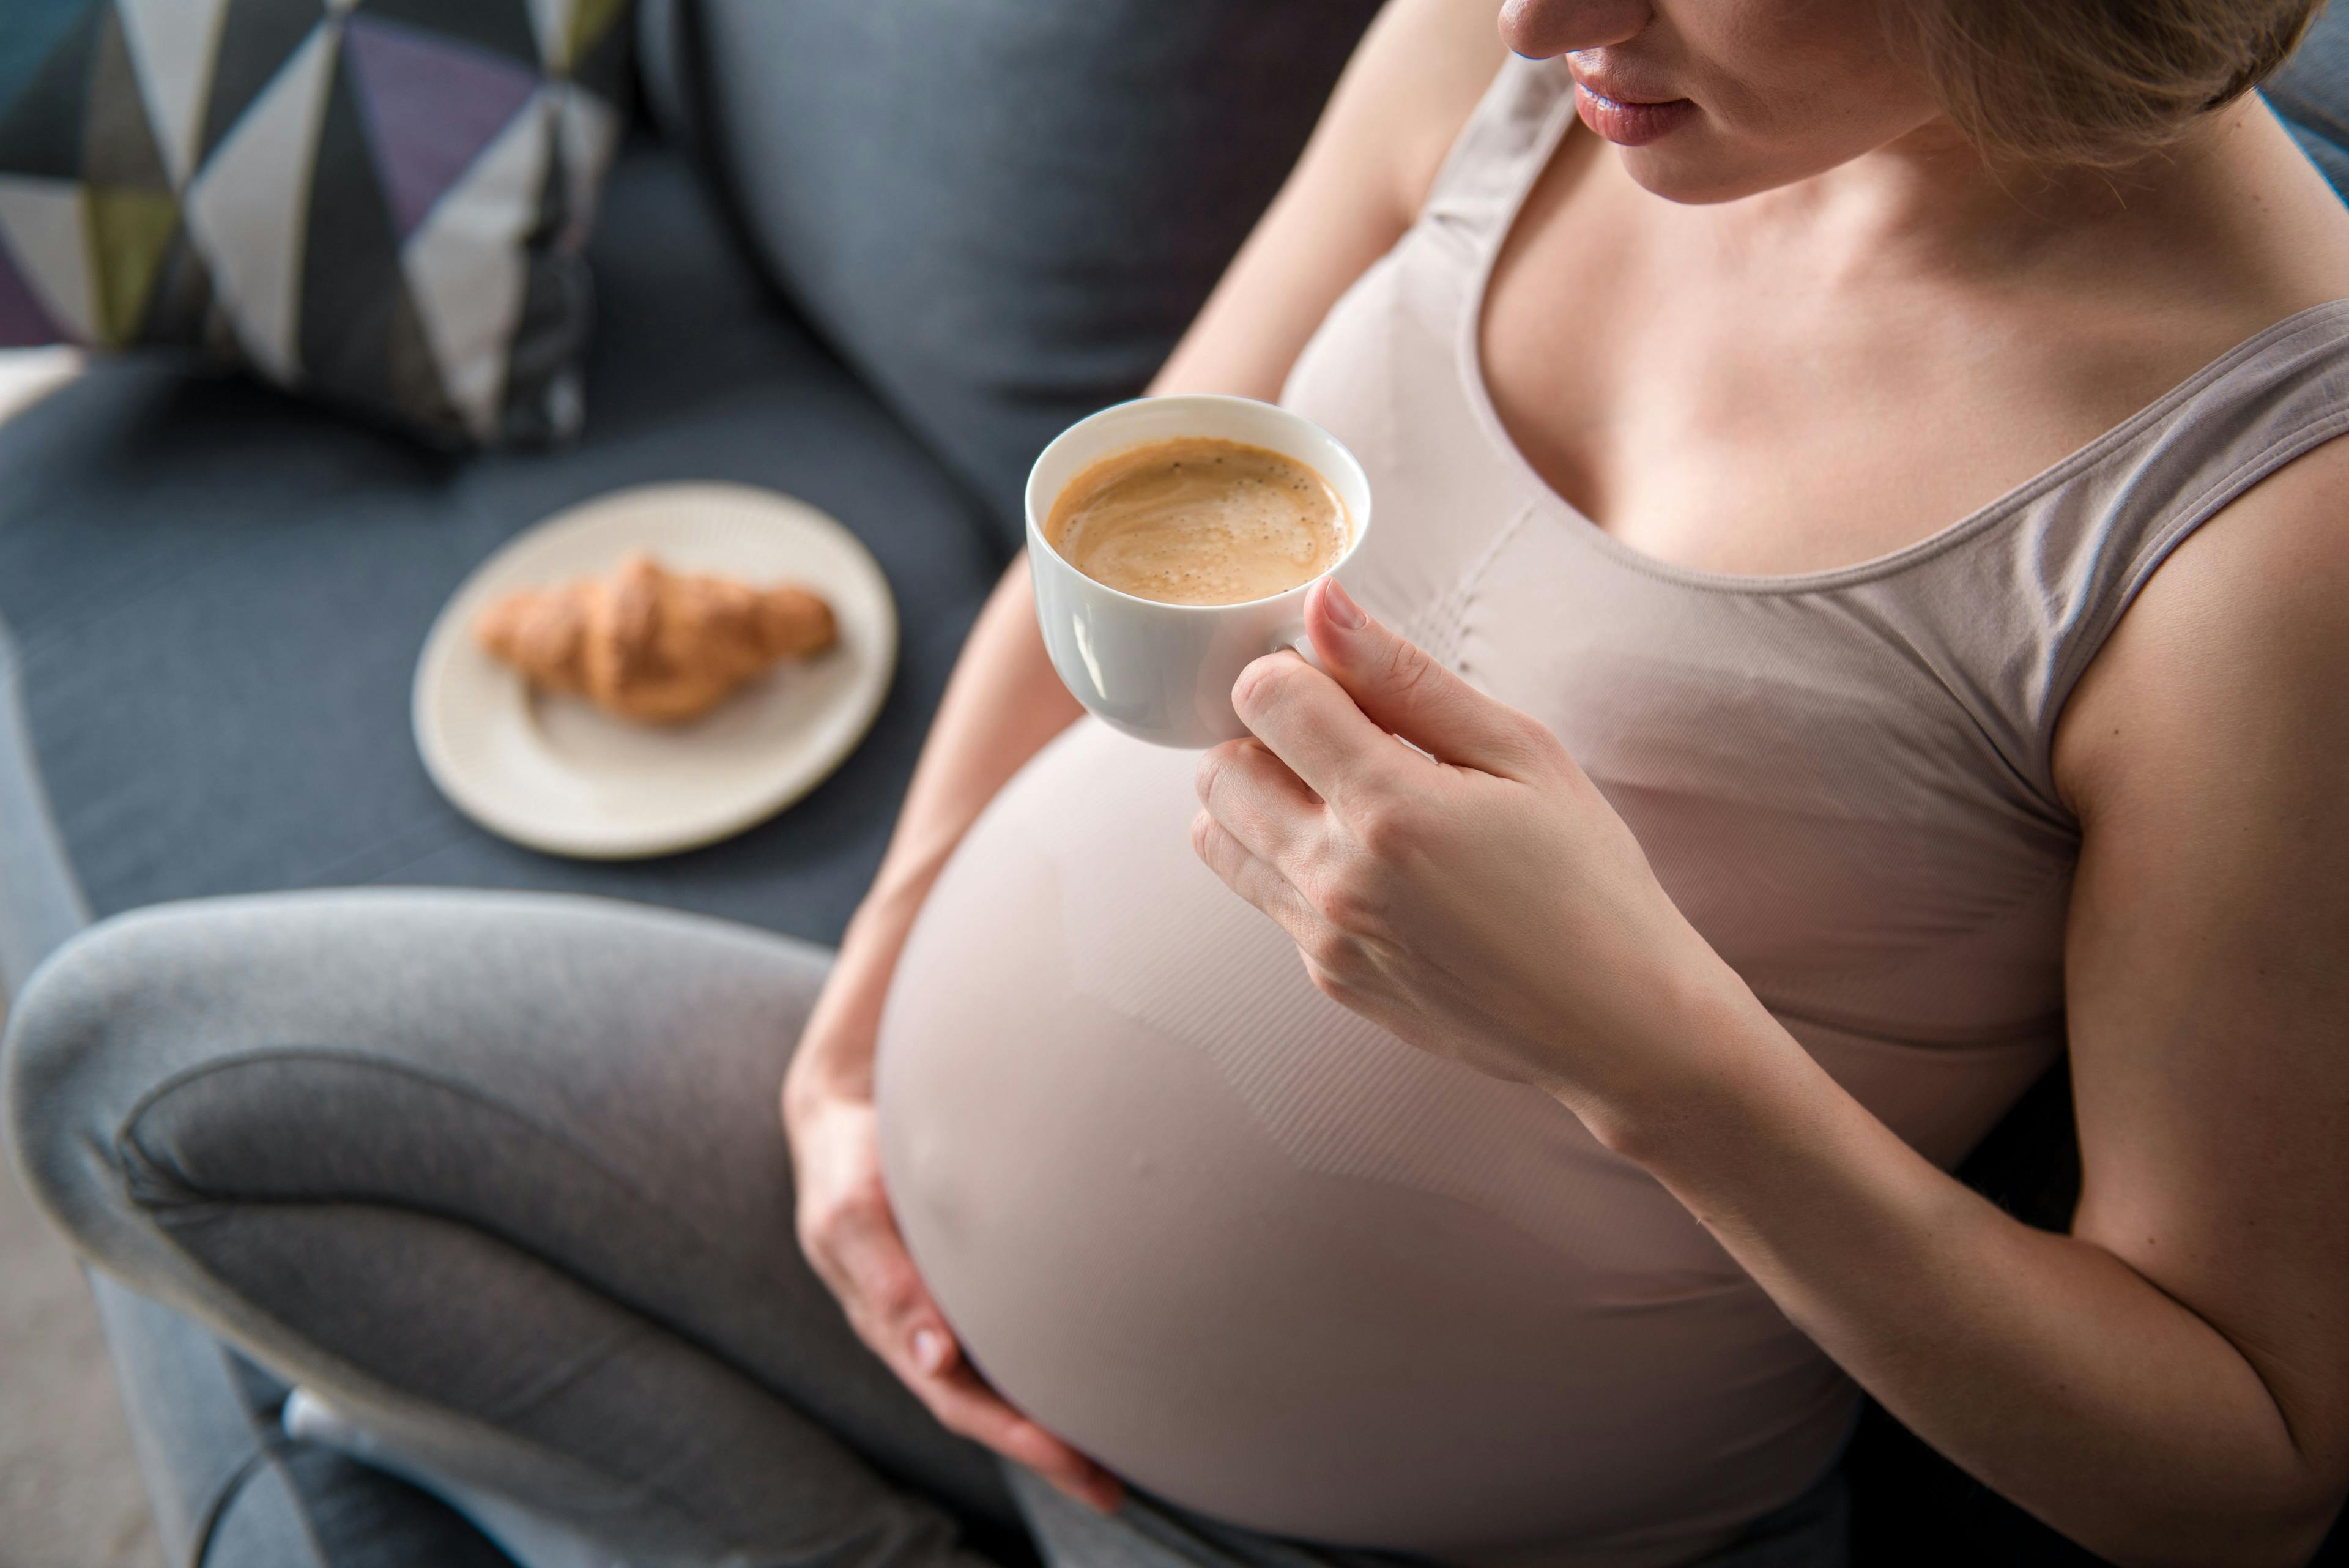 Maternal caffeine consumption and birth size